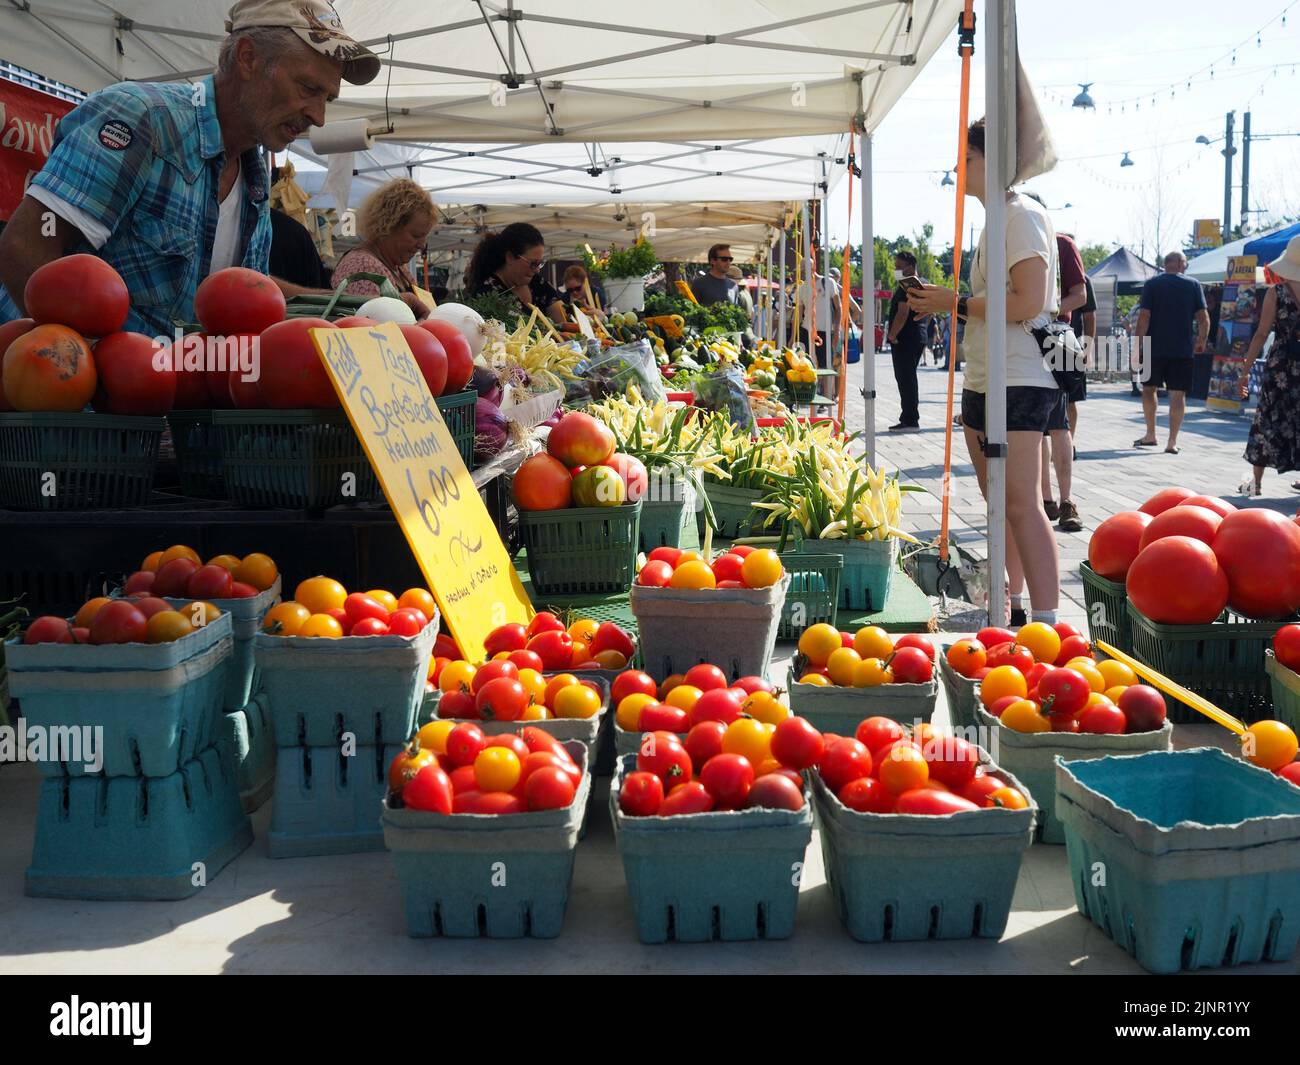 Scenes from the Farmer's Market at Lansdowne Place. Punnets of tomatoes and beans piled high. Ottawa, ON, Canada. Stock Photo